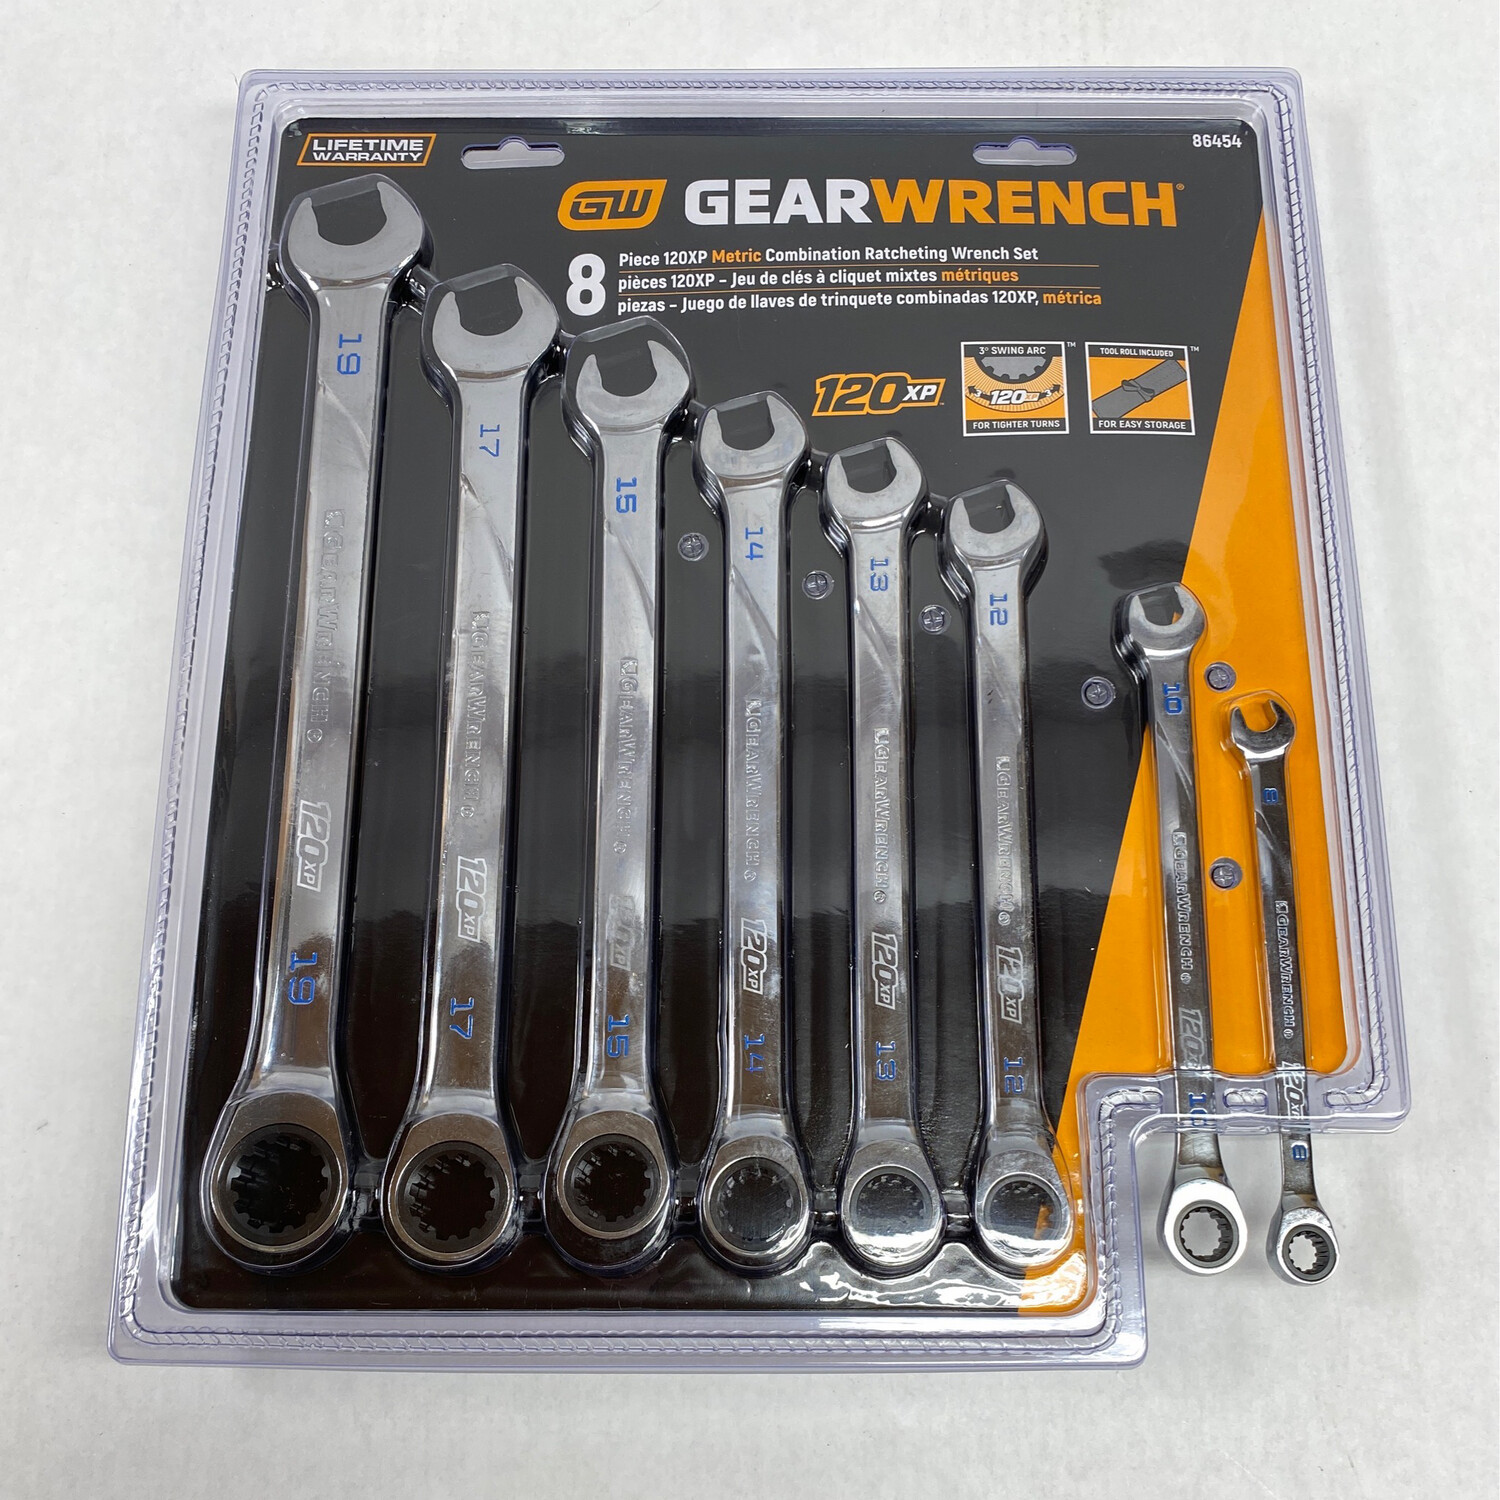 GearWrench 8 Piece 120XP Metric Combination Ratcheting Wrench Set 8-19MM, 86454